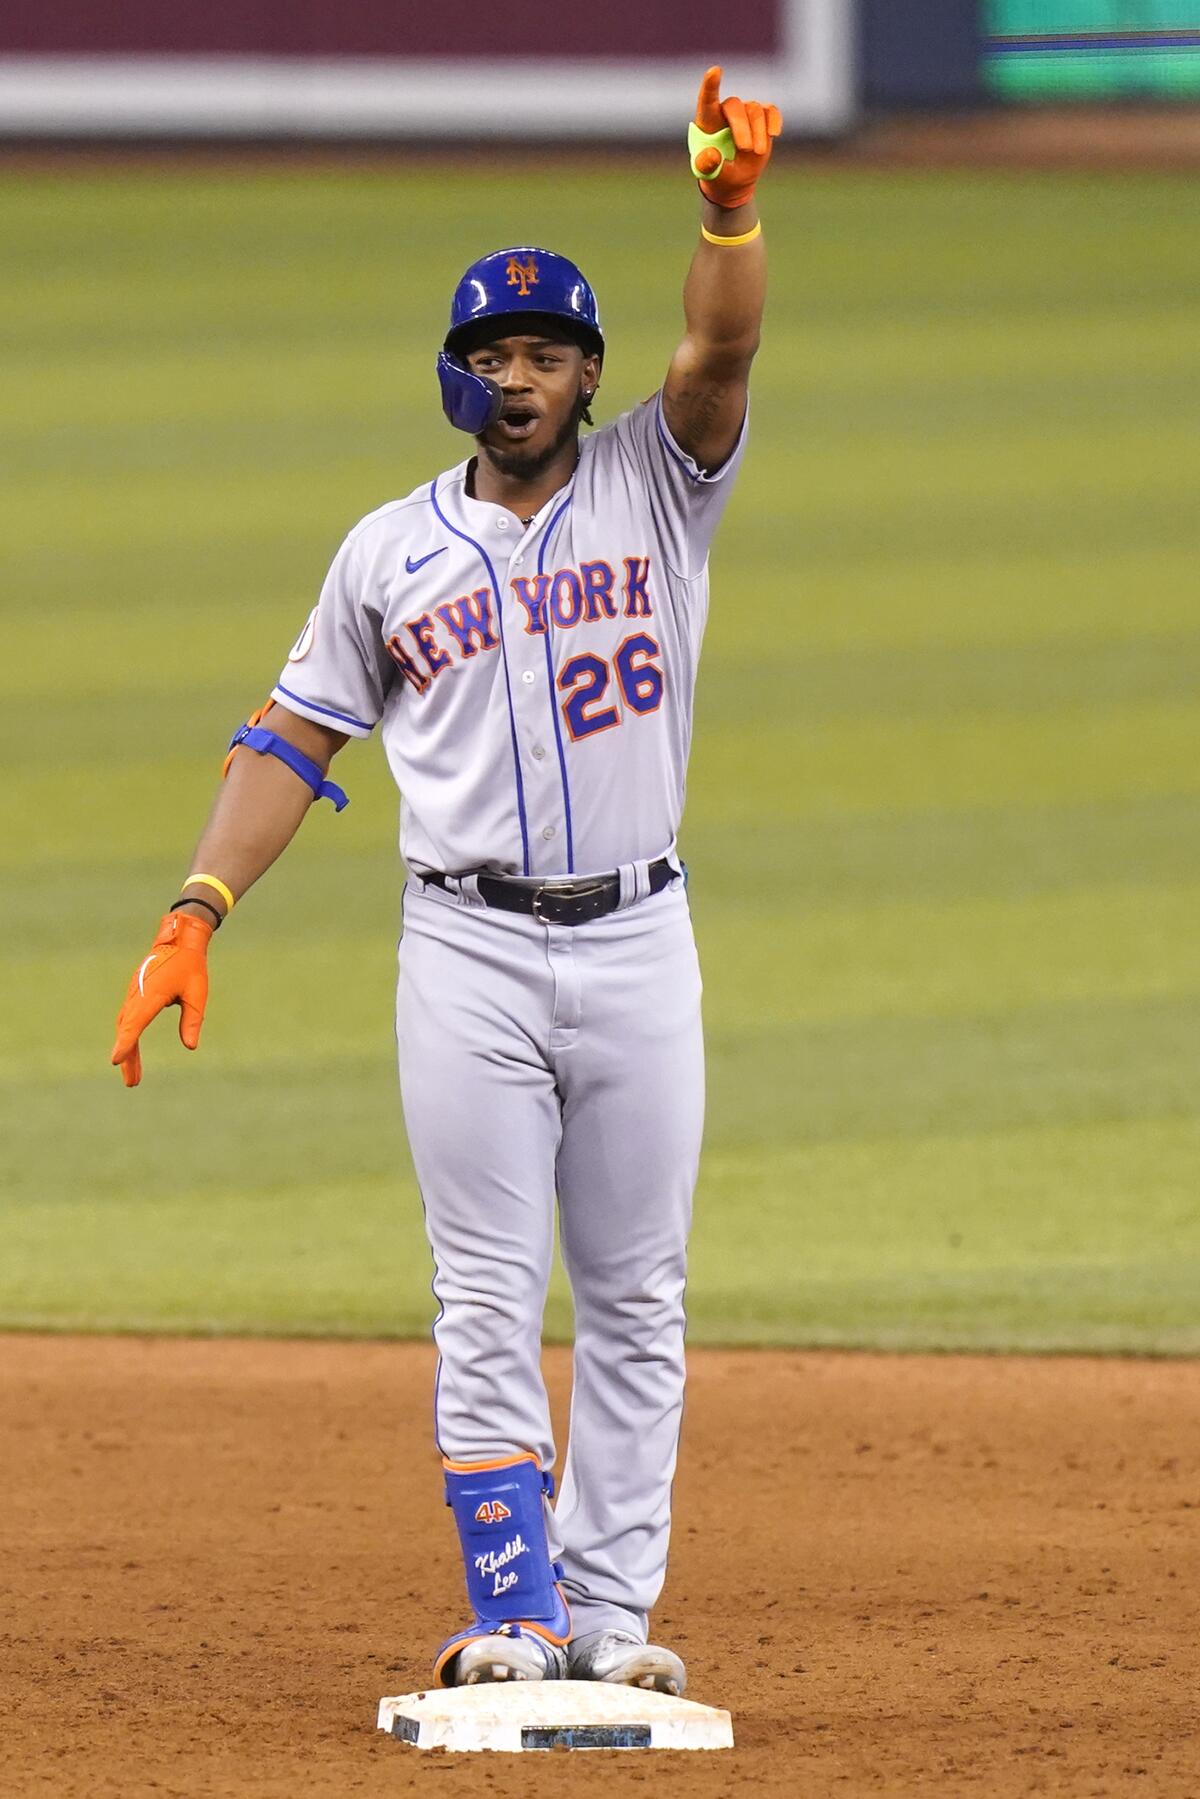 NY Mets' Dominic Smith to 10-day IL with left foot injury